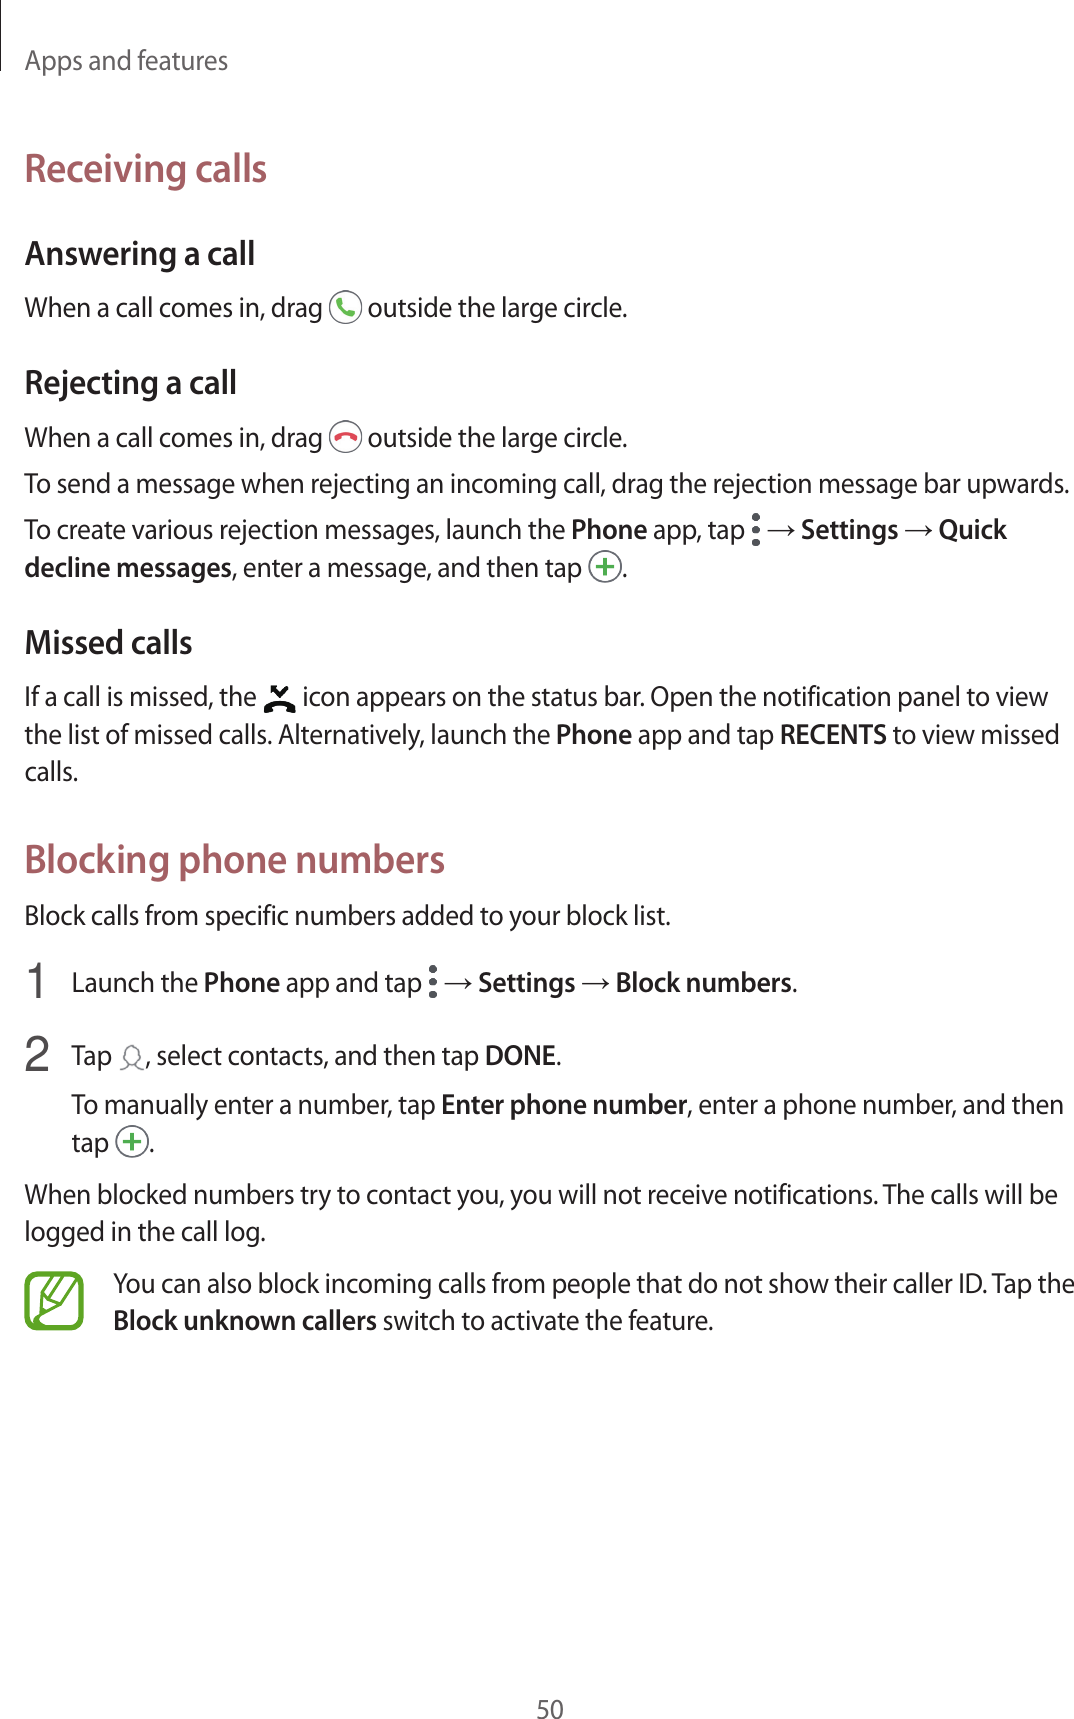 Apps and features50Receiving callsAnswering a callWhen a call comes in, drag   outside the large circle.Rejecting a callWhen a call comes in, drag   outside the large circle.To send a message when rejecting an incoming call, drag the rejection message bar upwards.To create various rejection messages, launch the Phone app, tap   → Settings → Quick decline messages, enter a message, and then tap  .Missed callsIf a call is missed, the   icon appears on the status bar. Open the notification panel to view the list of missed calls. Alternatively, launch the Phone app and tap RECENTS to view missed calls.Blocking phone numbersBlock calls from specific numbers added to your block list.1  Launch the Phone app and tap   → Settings → Block numbers.2  Tap  , select contacts, and then tap DONE.To manually enter a number, tap Enter phone number, enter a phone number, and then tap  .When blocked numbers try to contact you, you will not receive notifications. The calls will be logged in the call log.You can also block incoming calls from people that do not show their caller ID. Tap the Block unknown callers switch to activate the feature.